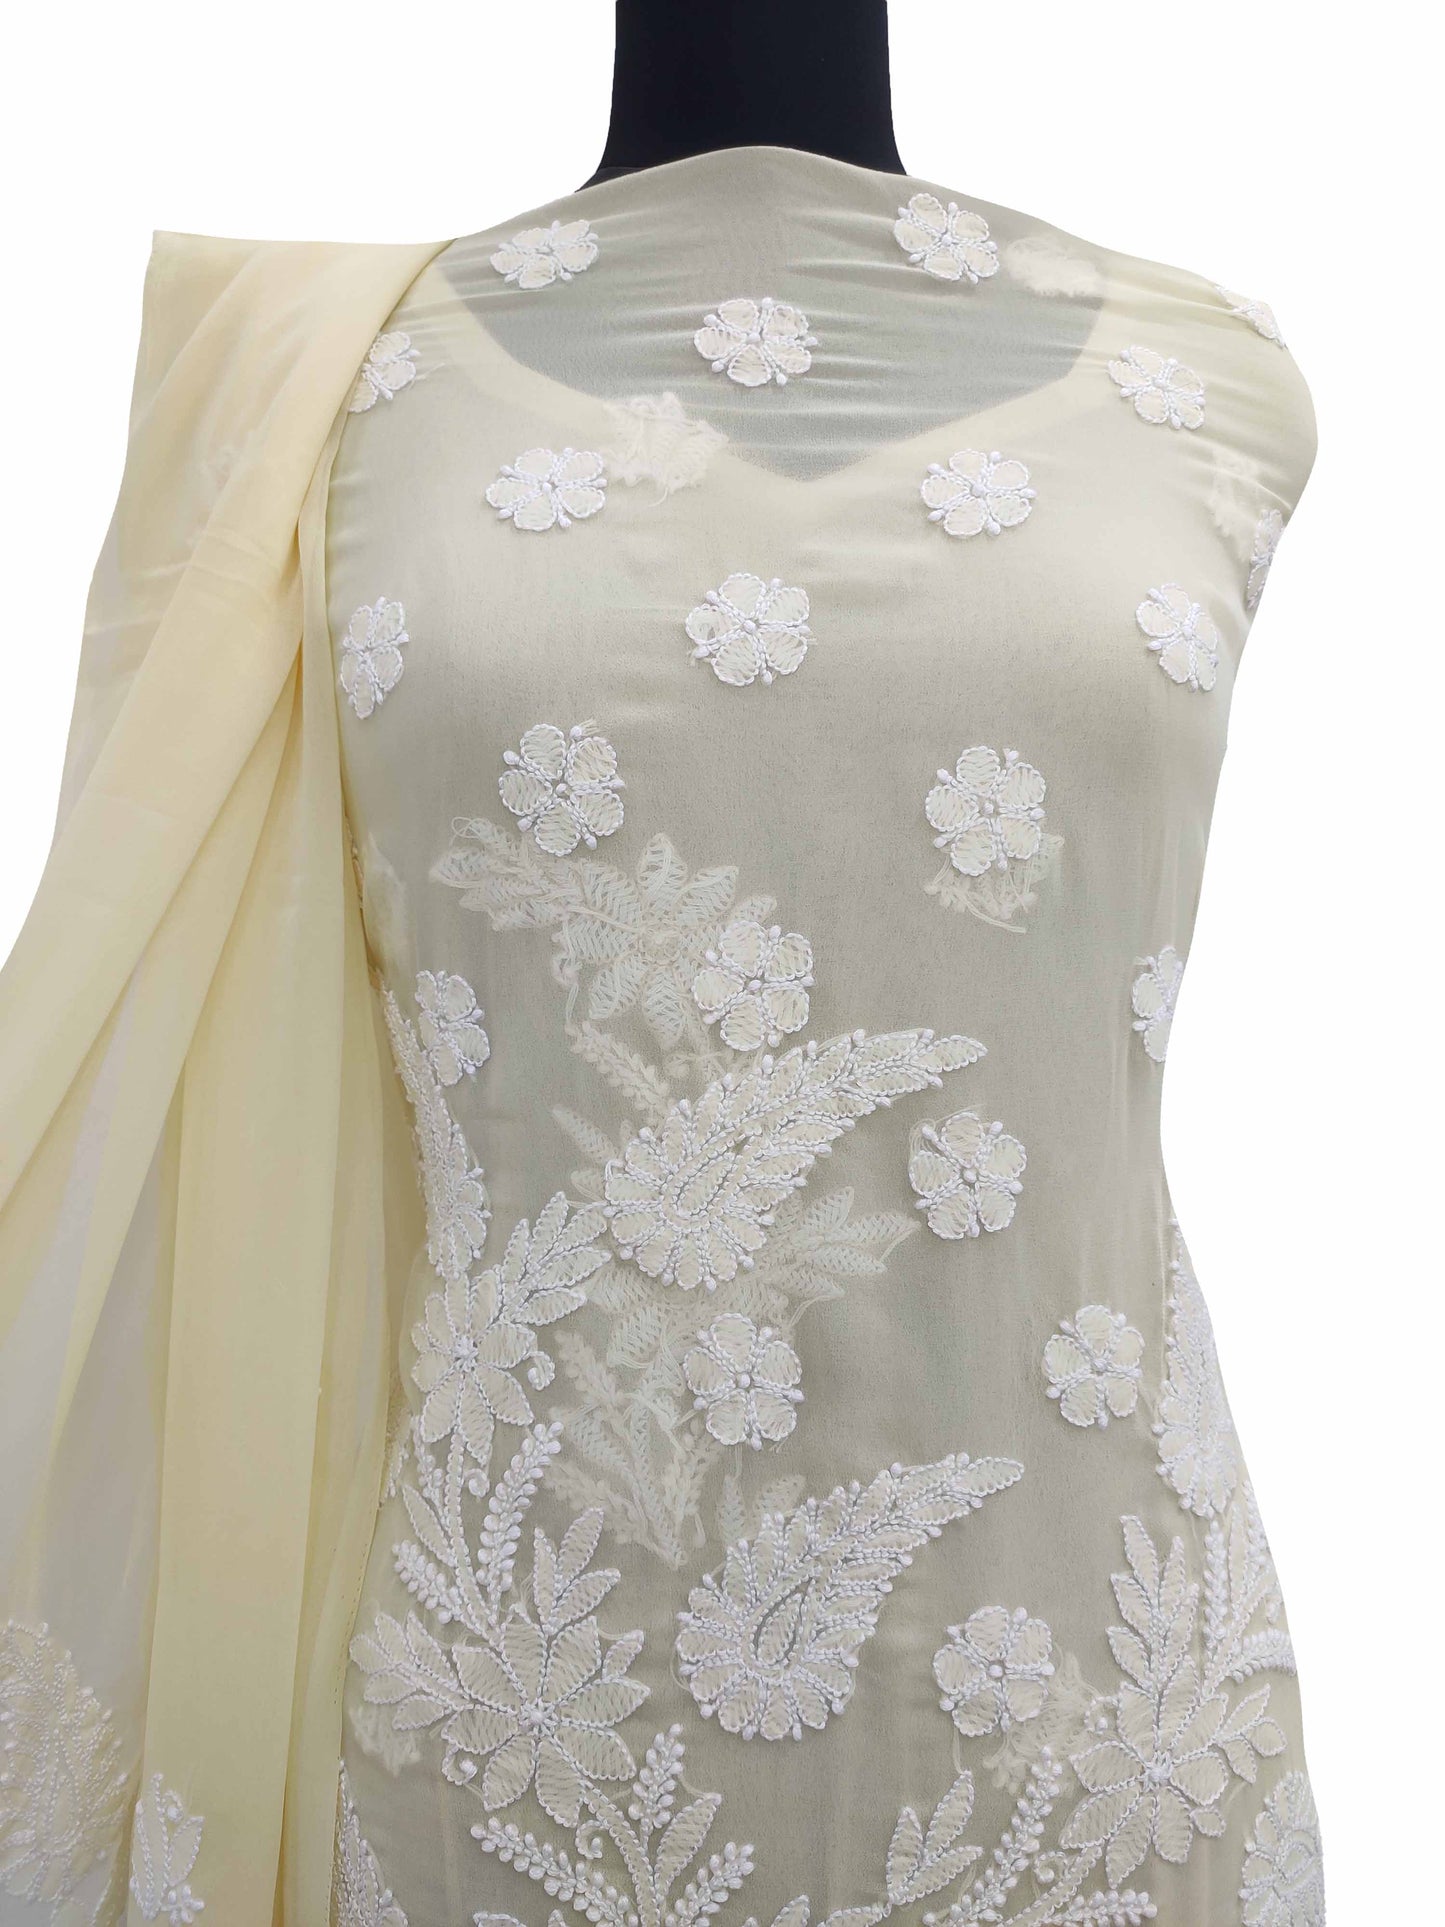 Shyamal Chikan Hand Embroidered Lemon High Quality Georgette Lucknowi Chikankari Unstitched Suit Piece With Four Side Border Dupatta - S11406